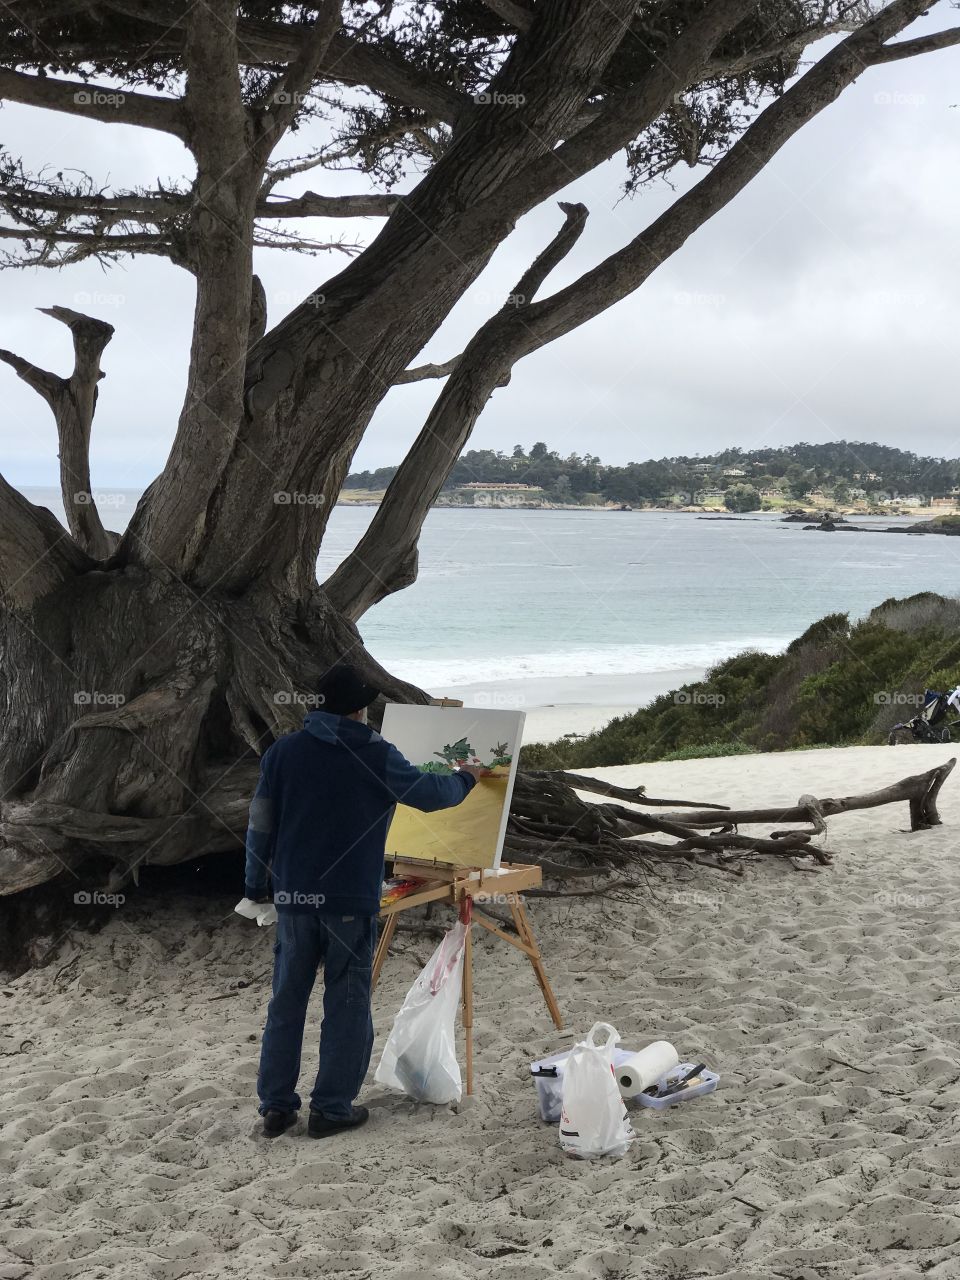 Painting by the sea 